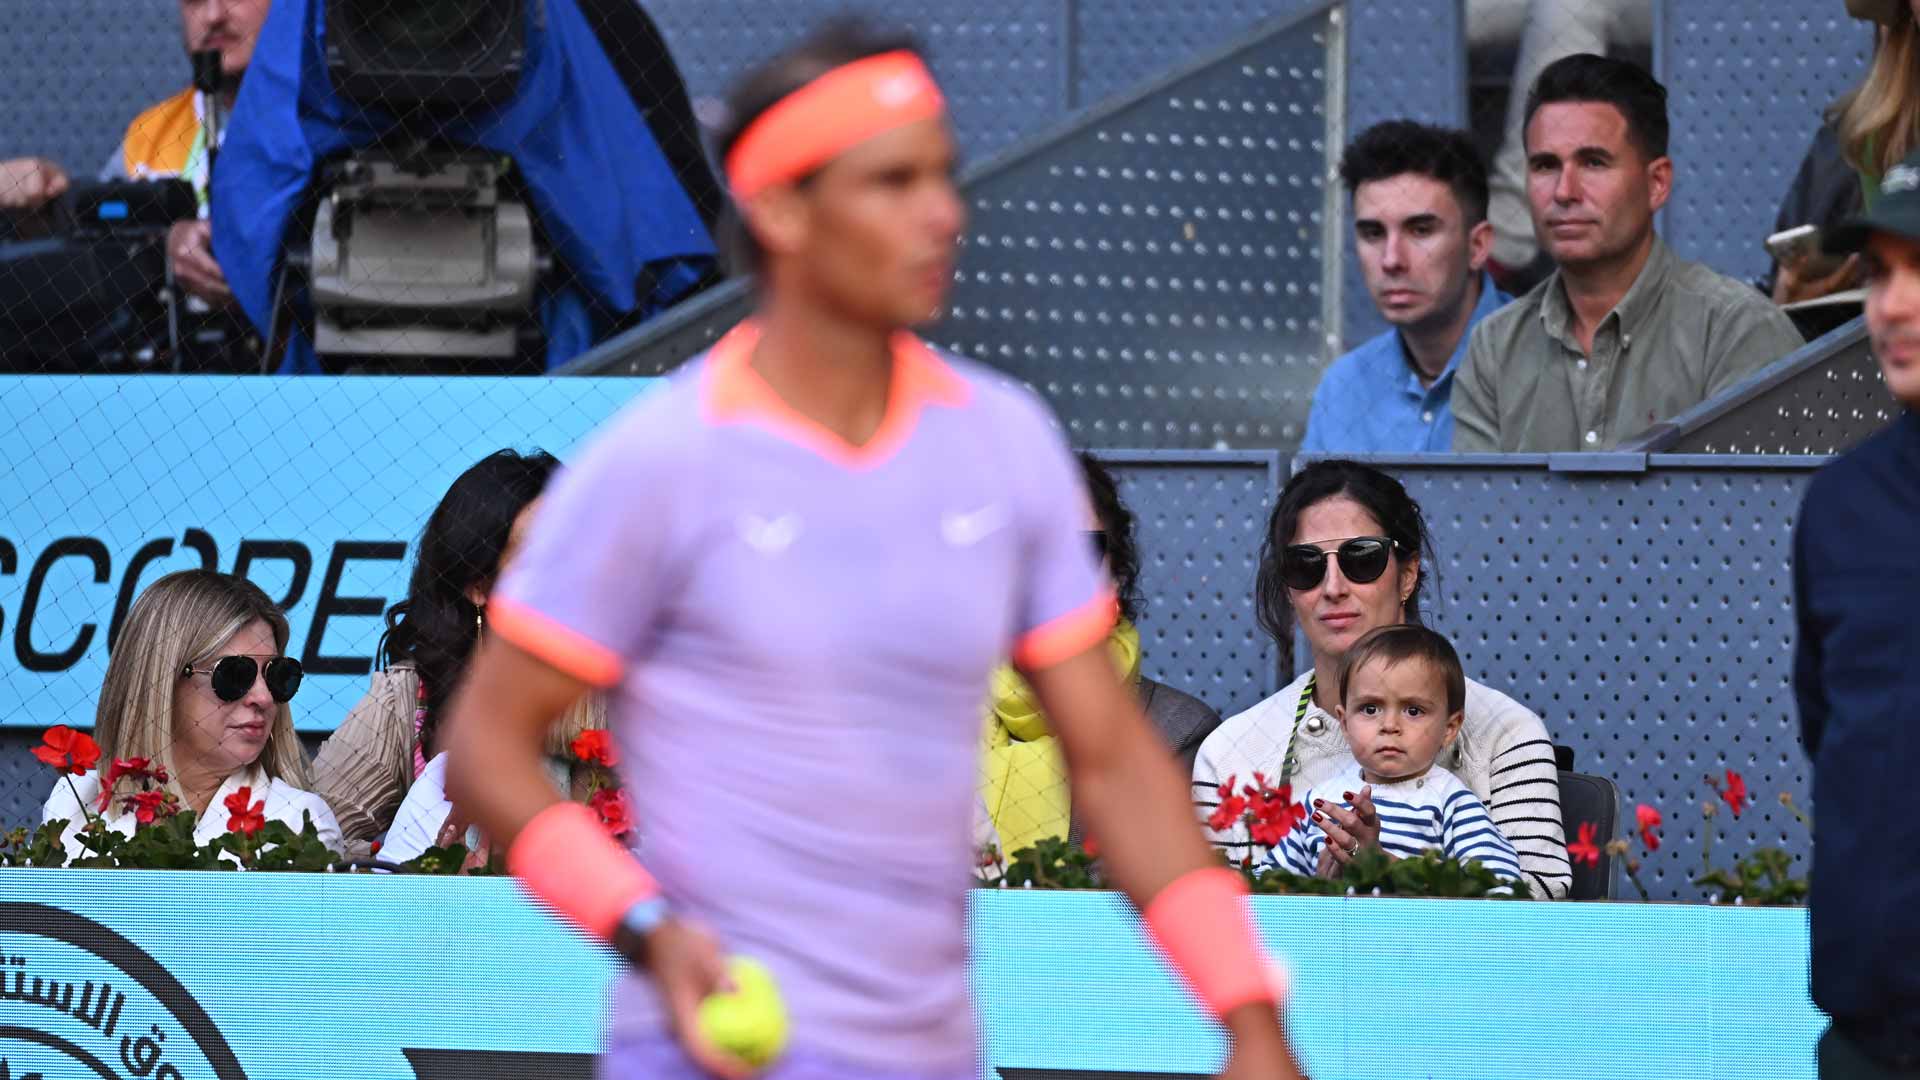 Rafael Nadal competes Thursday in Madrid, where his wife Maria Francisca and son Rafael were in attendance.